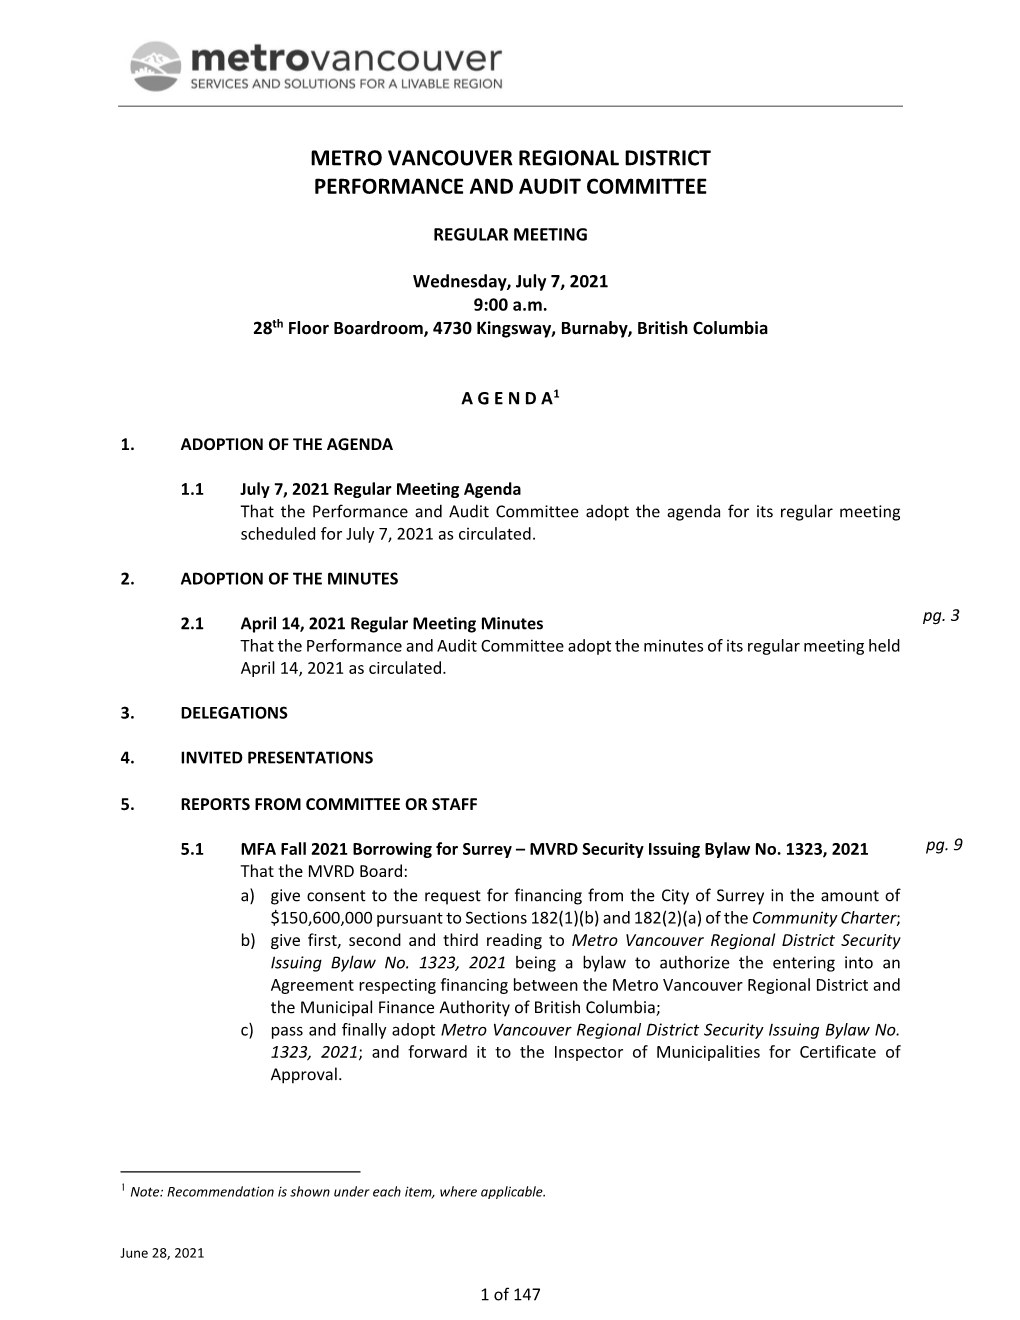 Performance and Audit Committee Meeting Agenda